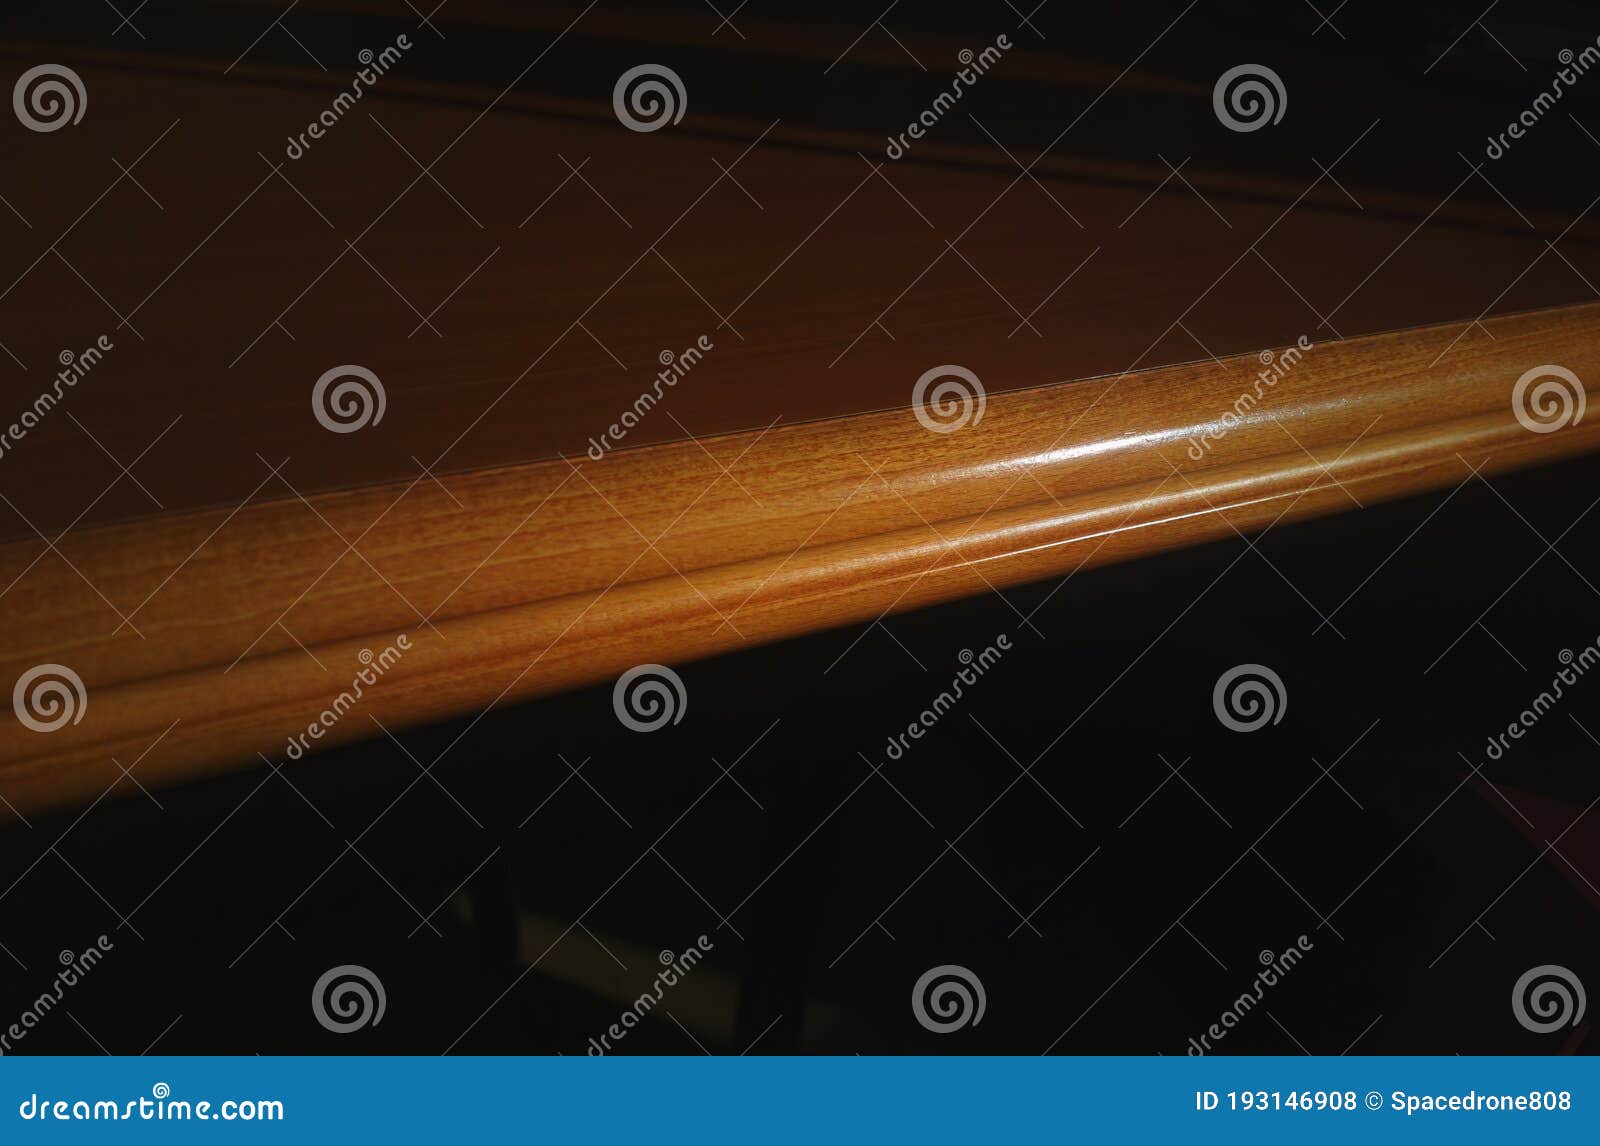 Illuminated Border Of The Wooden Table Background Stock Photo Image Of Backdrop Brown